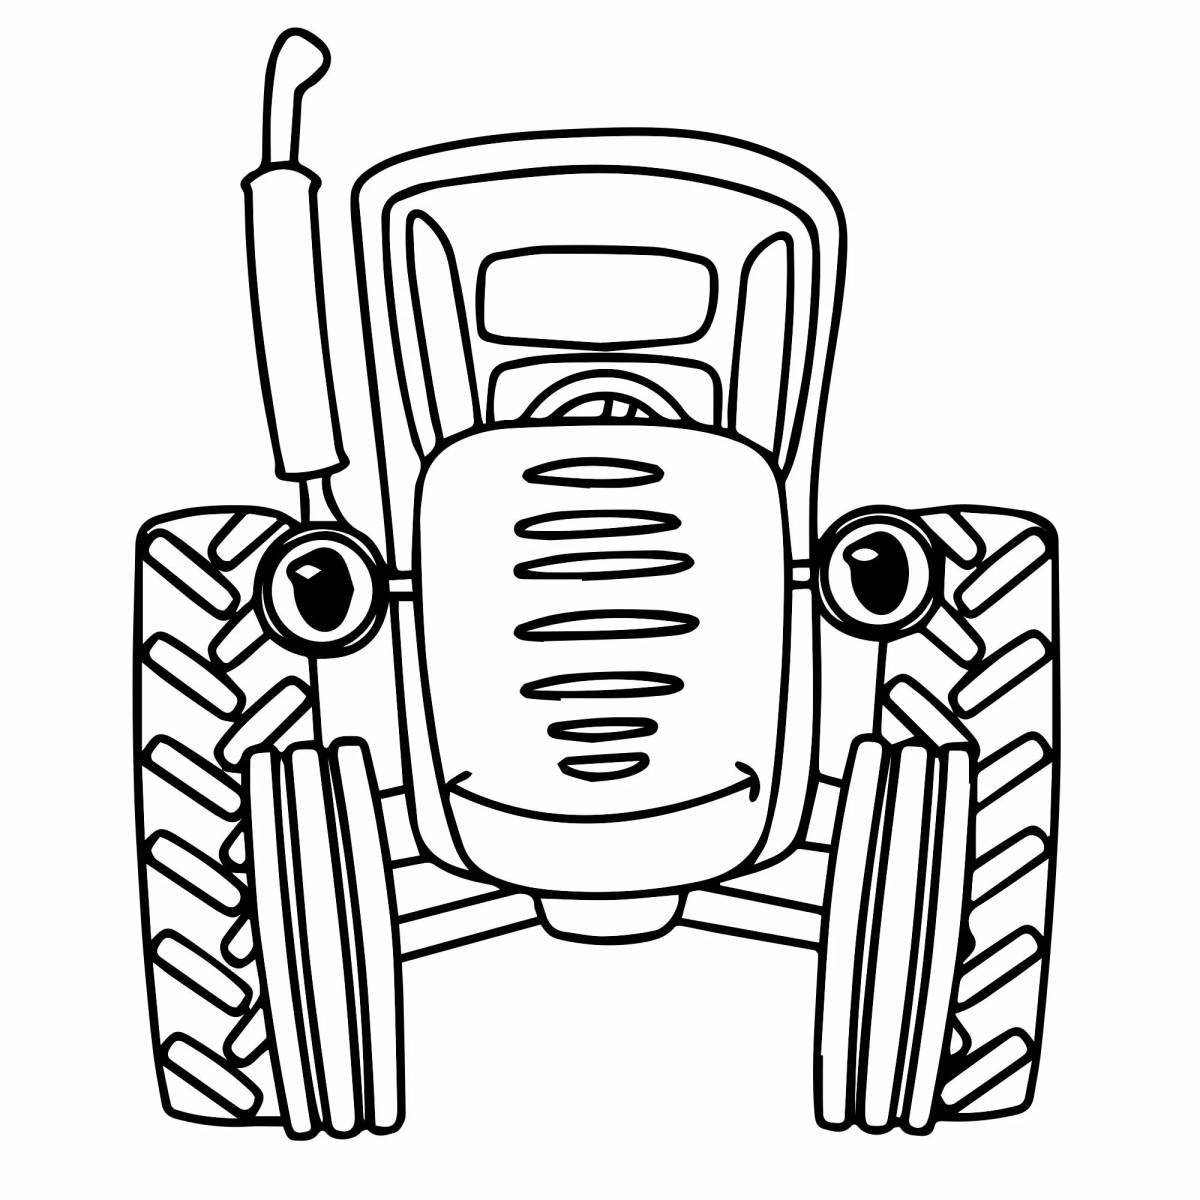 Blue tractor playful coloring game